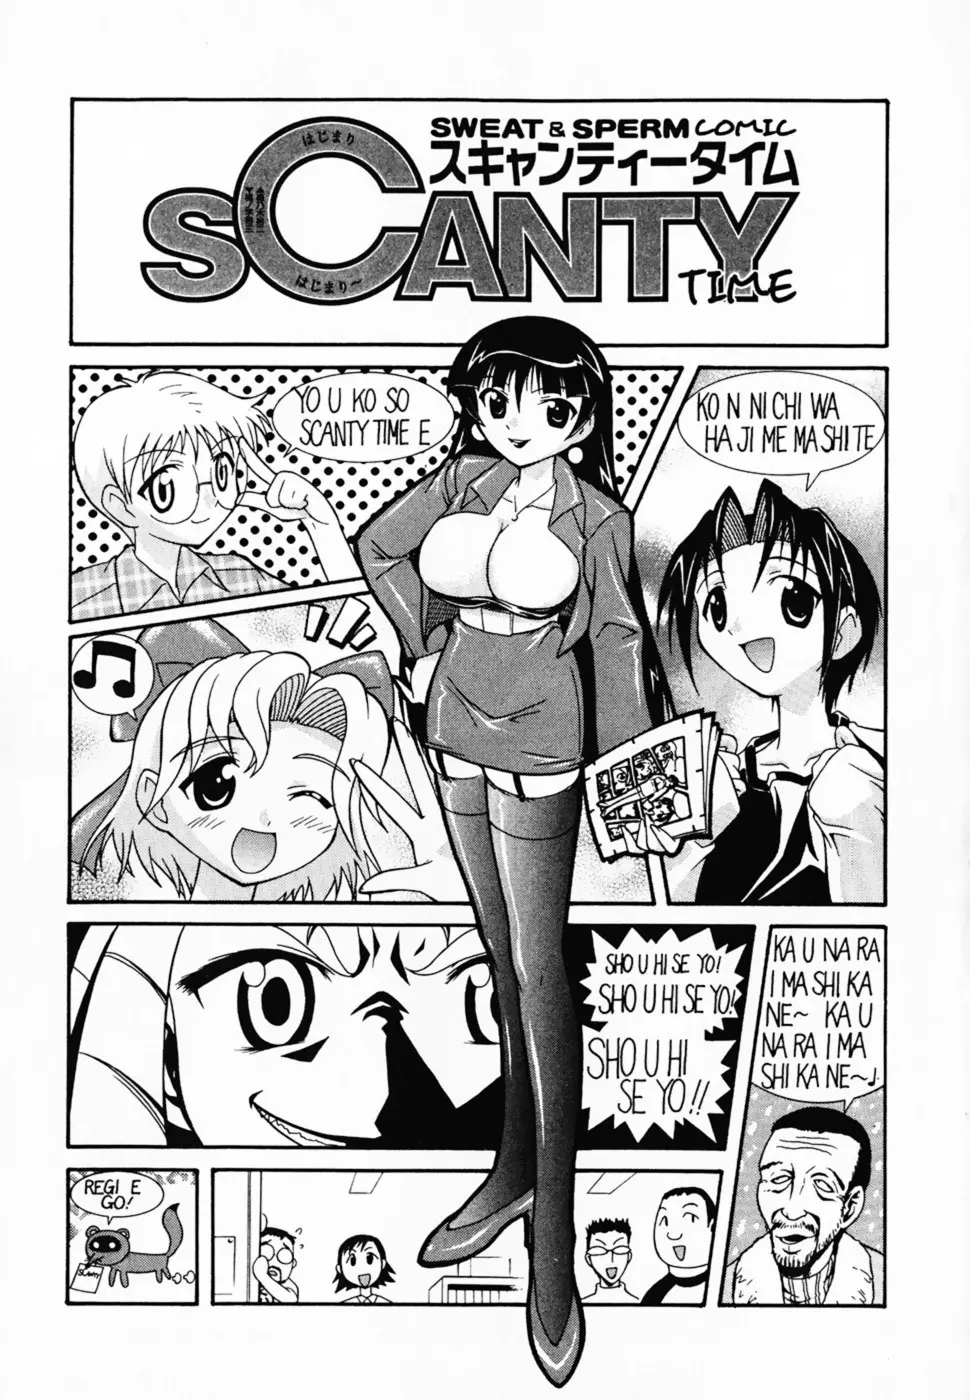 SCANTY TIME 6ページ